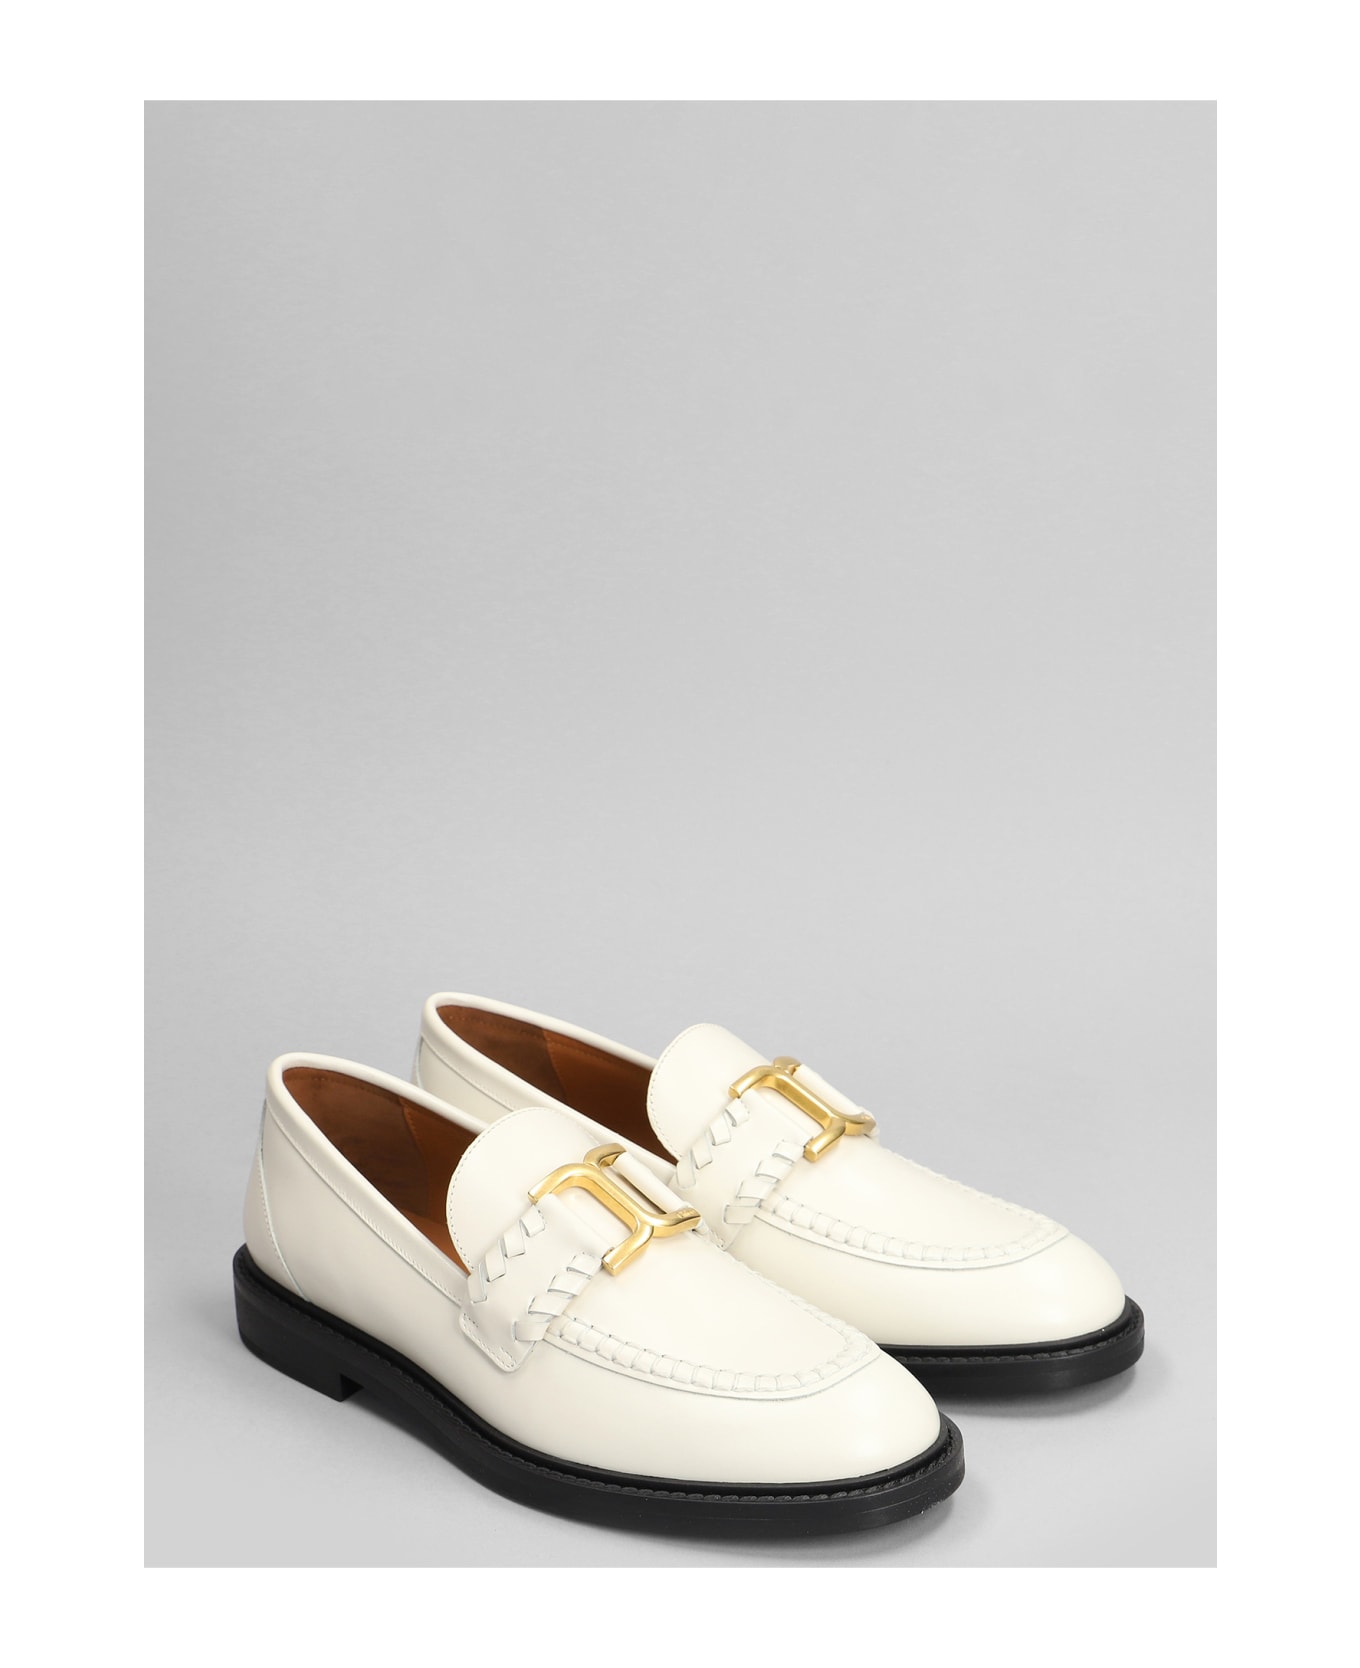 Chloé Mercie Loafers In White Leather - white